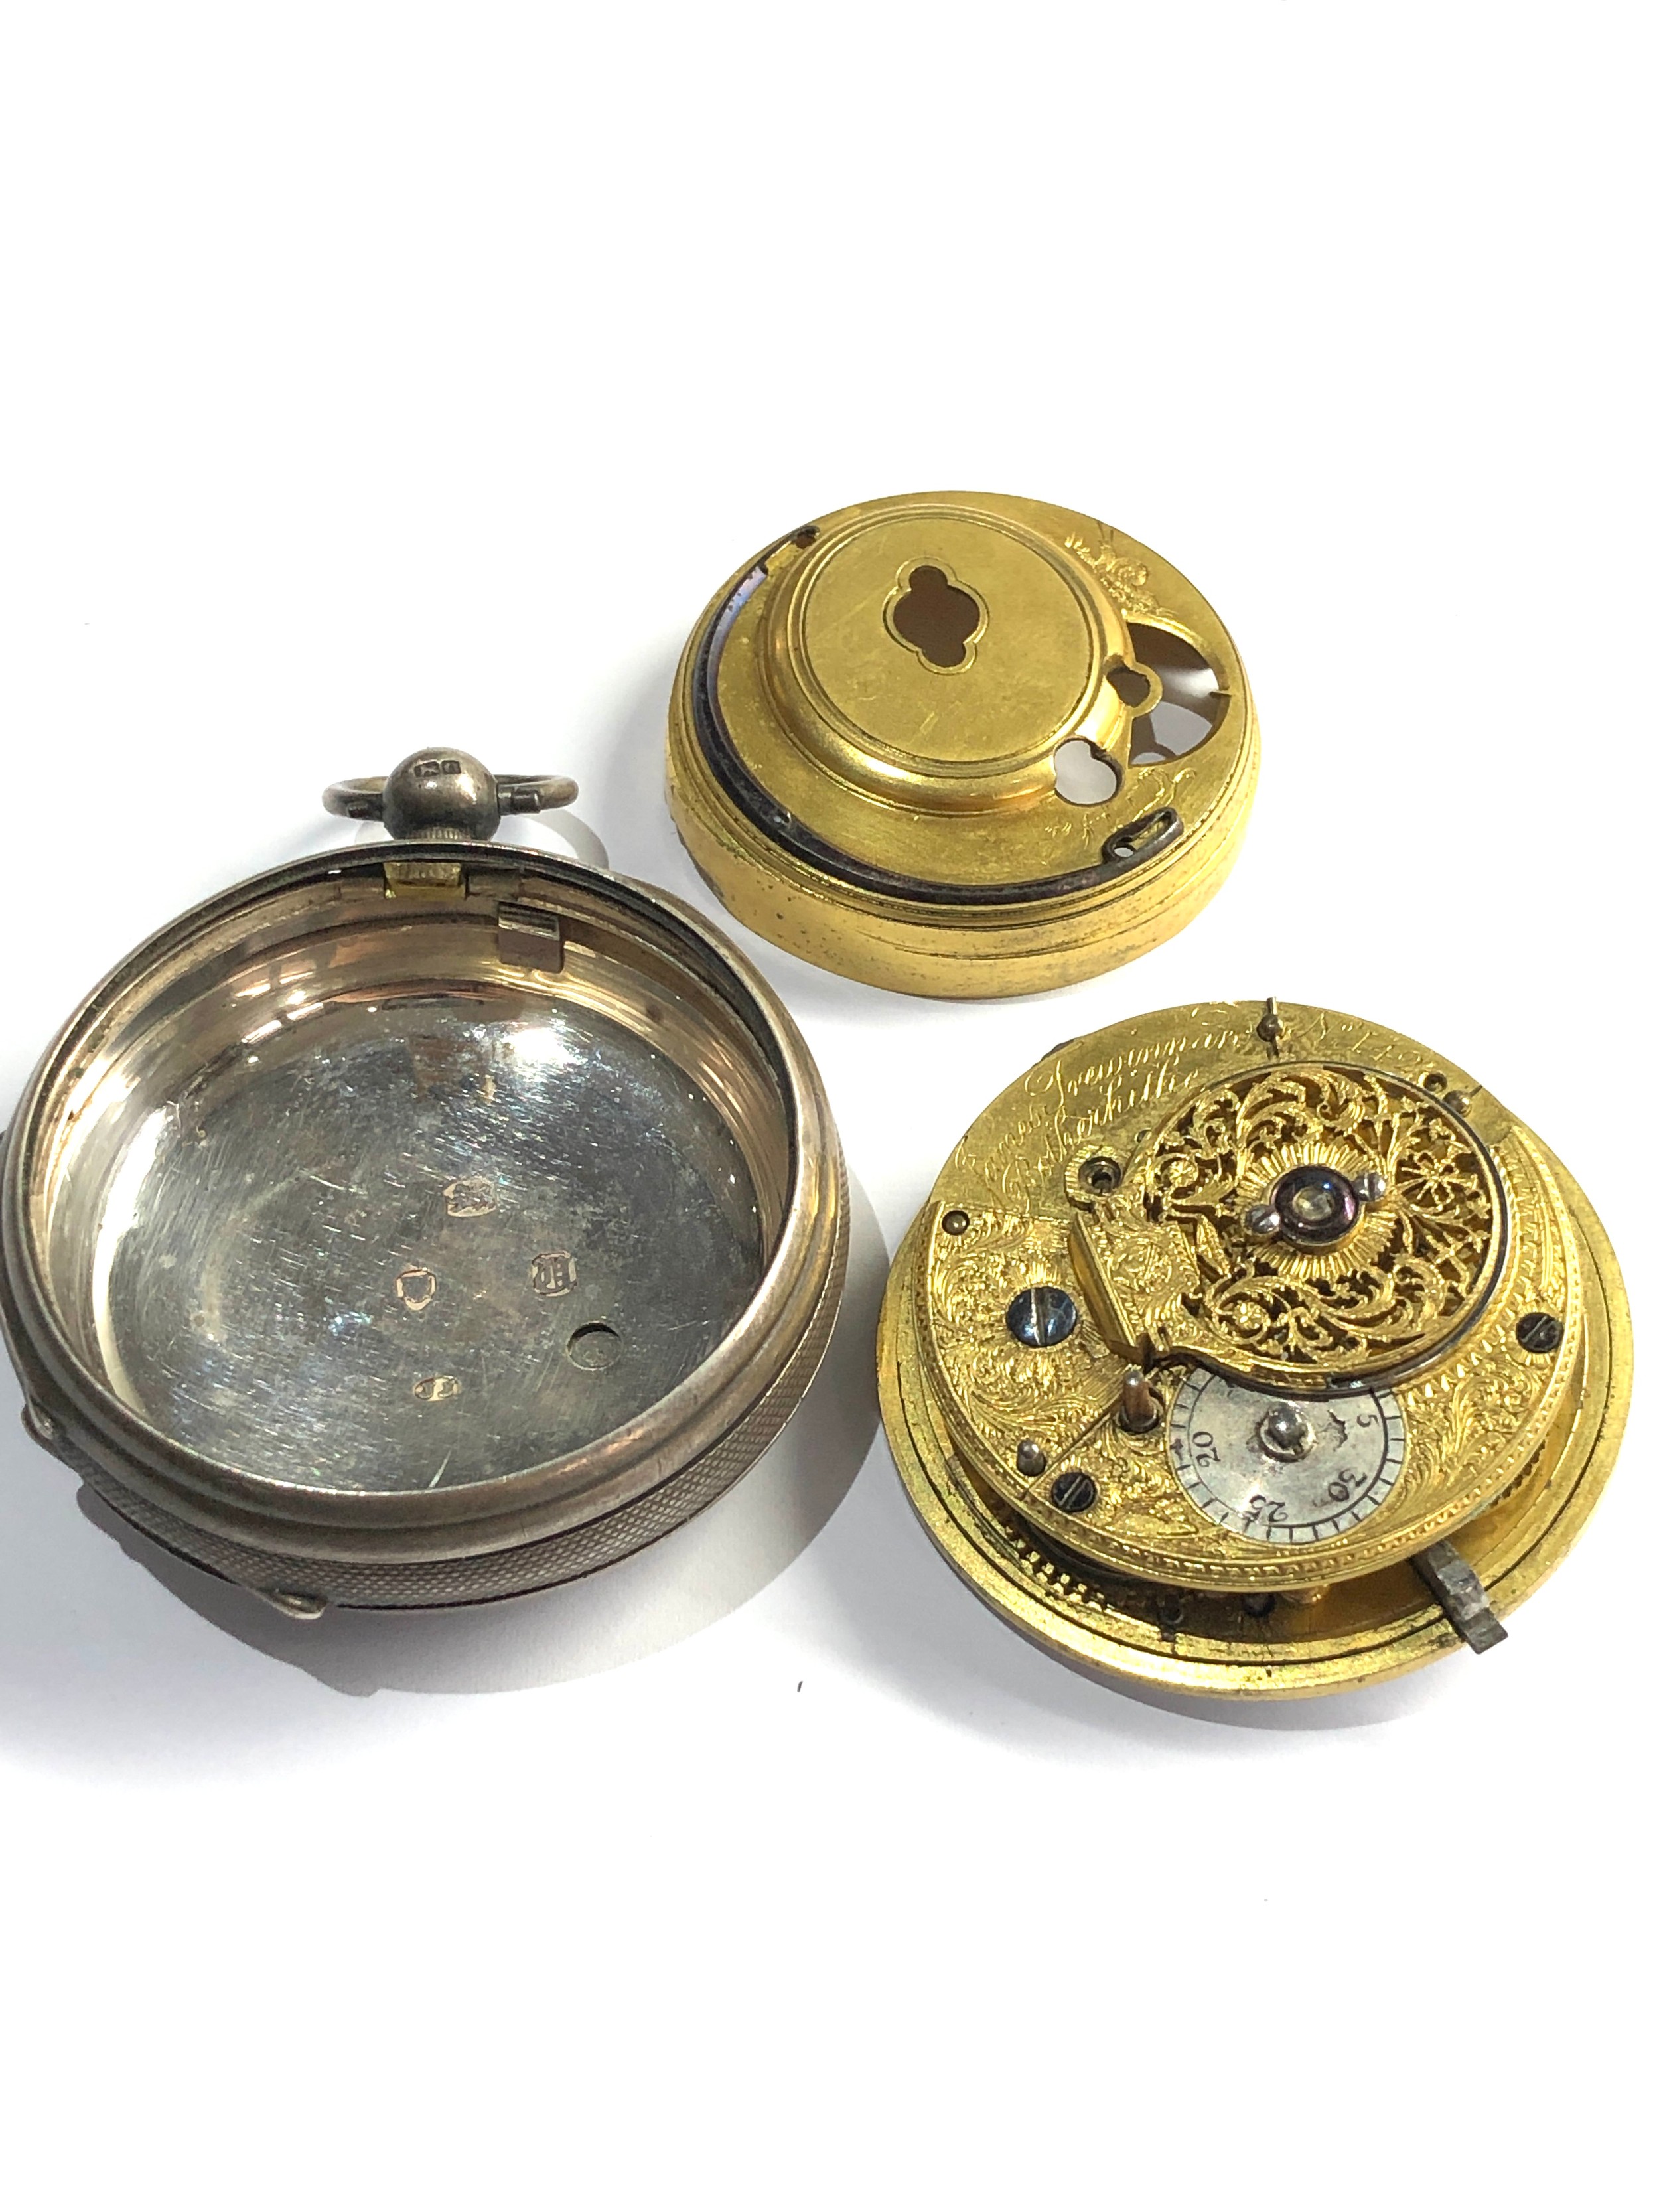 Antique silver verge fusee pocket watch diamond end stone spares or repair